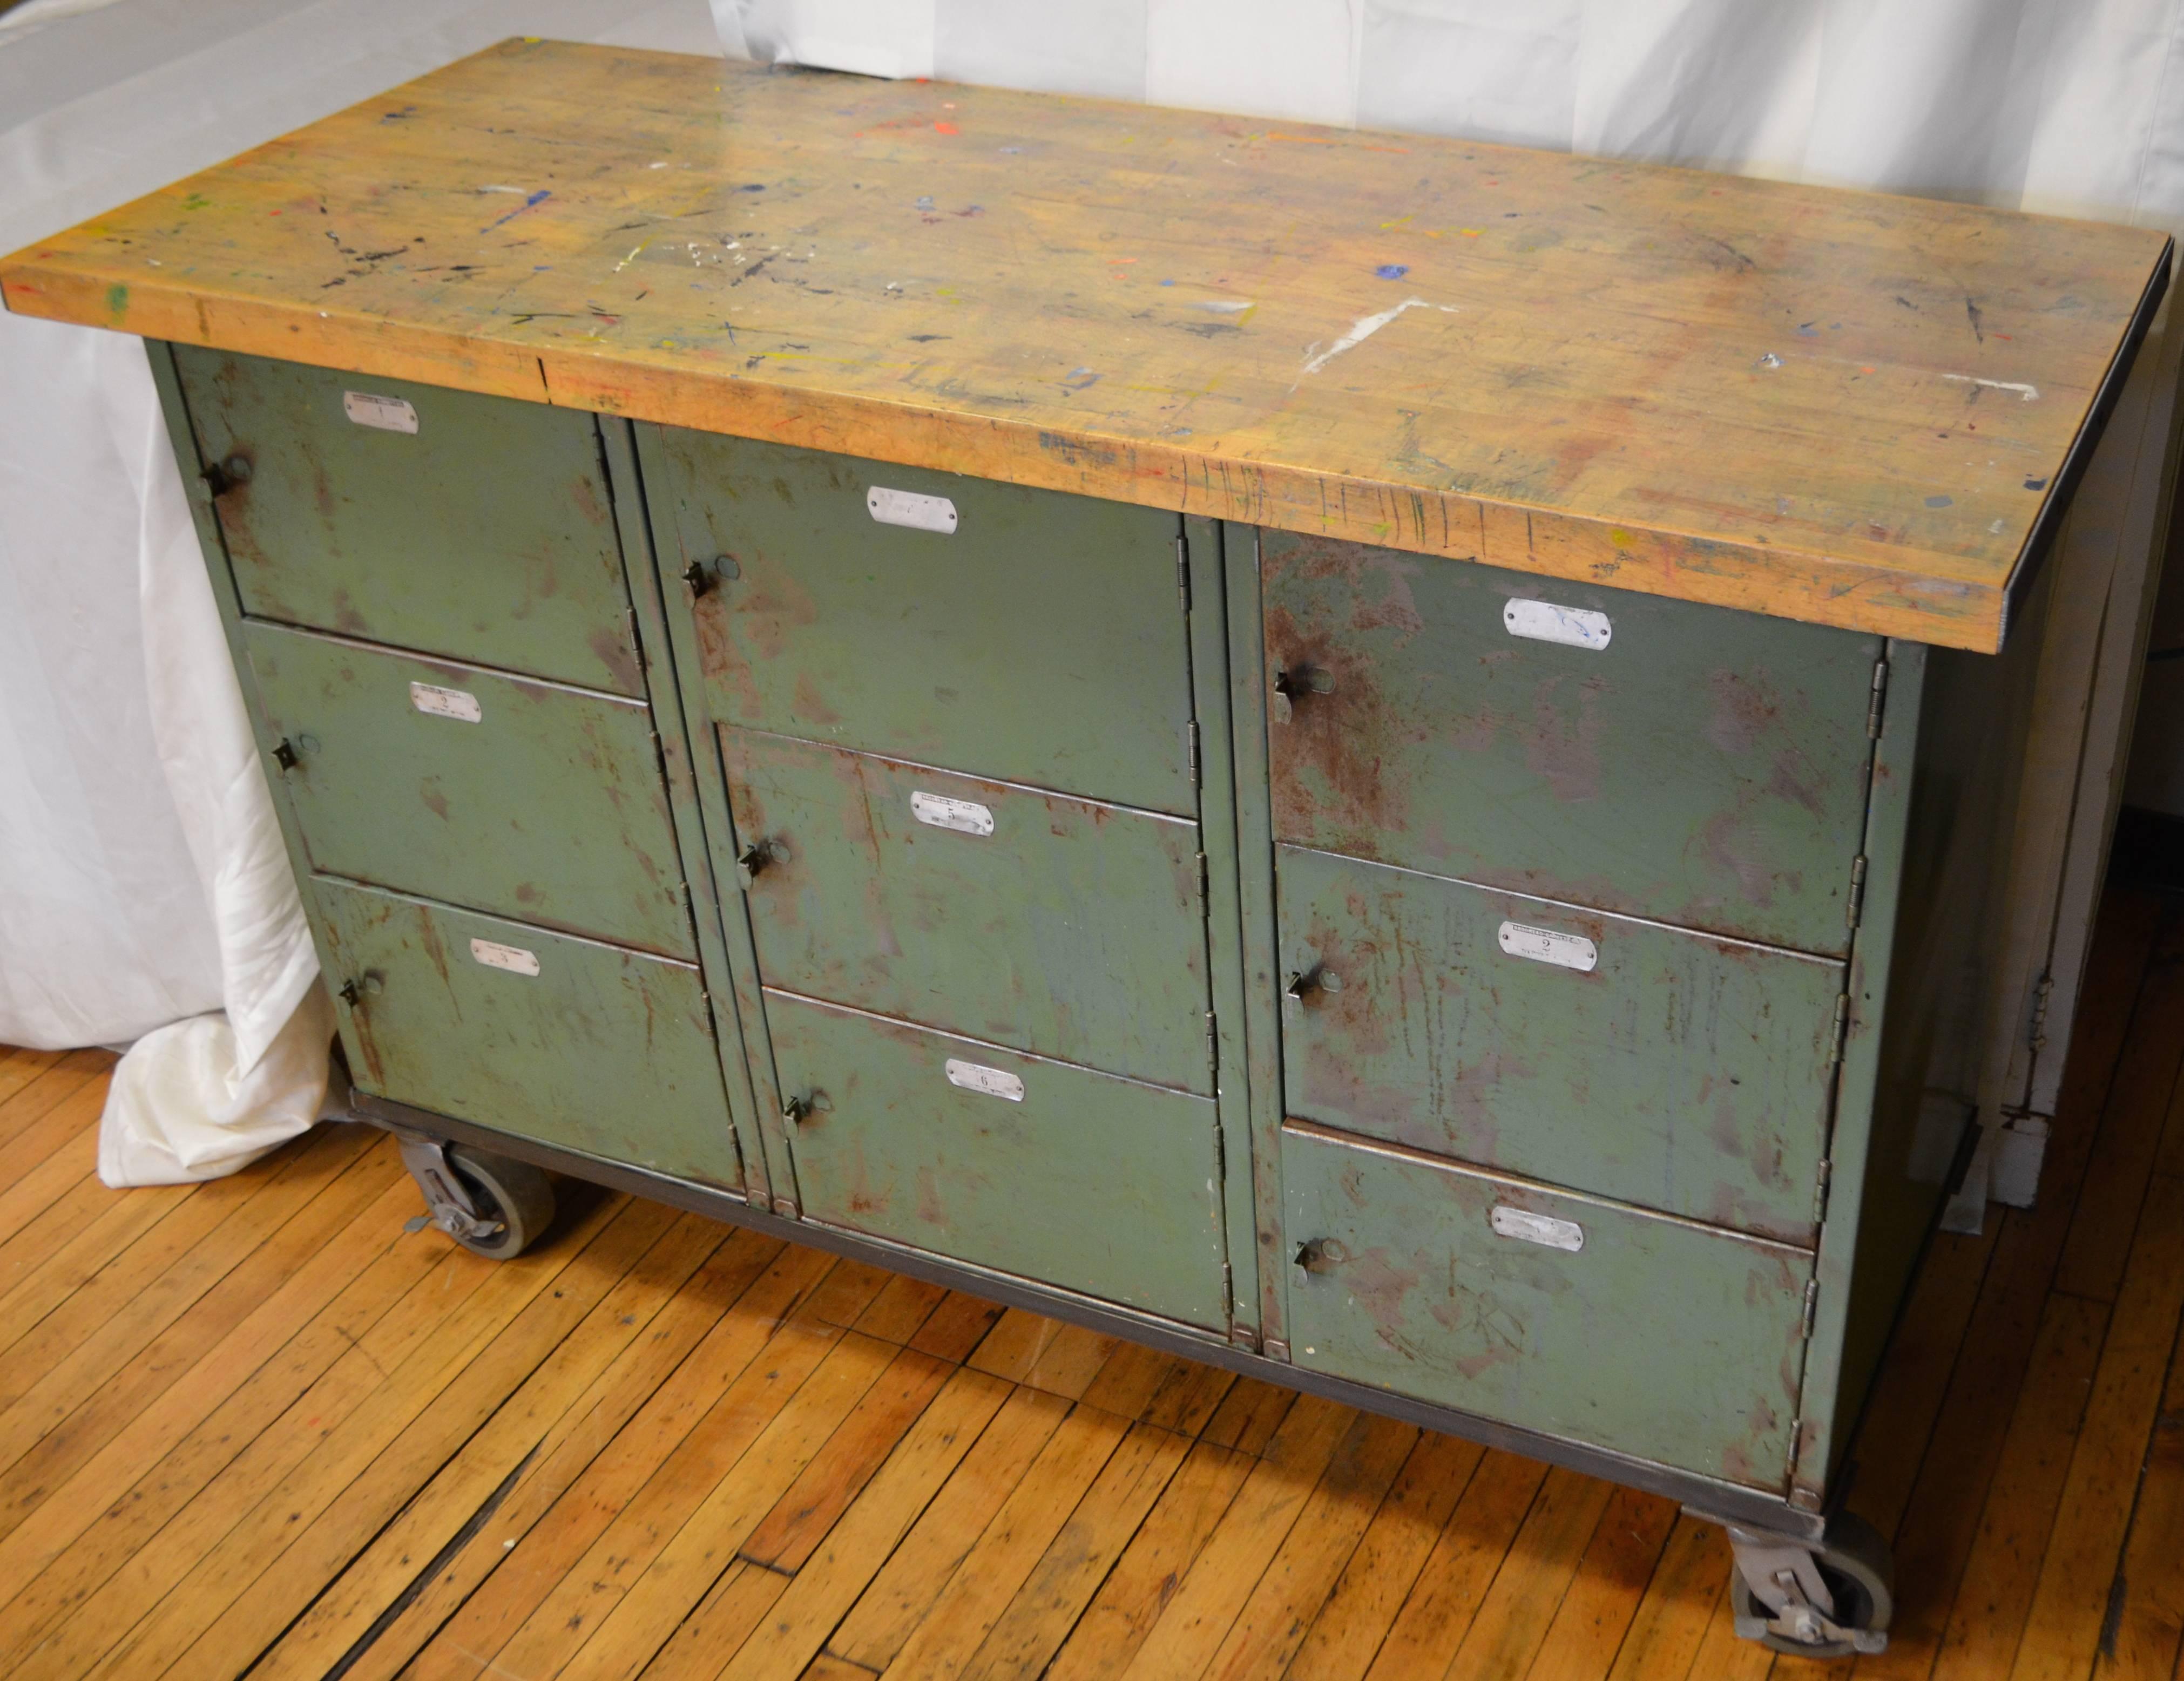 Cabinet with maple worktop found in art school is on locking wheels with nine numbered storage compartments. Piece has been cleaned and sealed, including the top with paint marks and splotches left intact from student art work. Highly versatile with